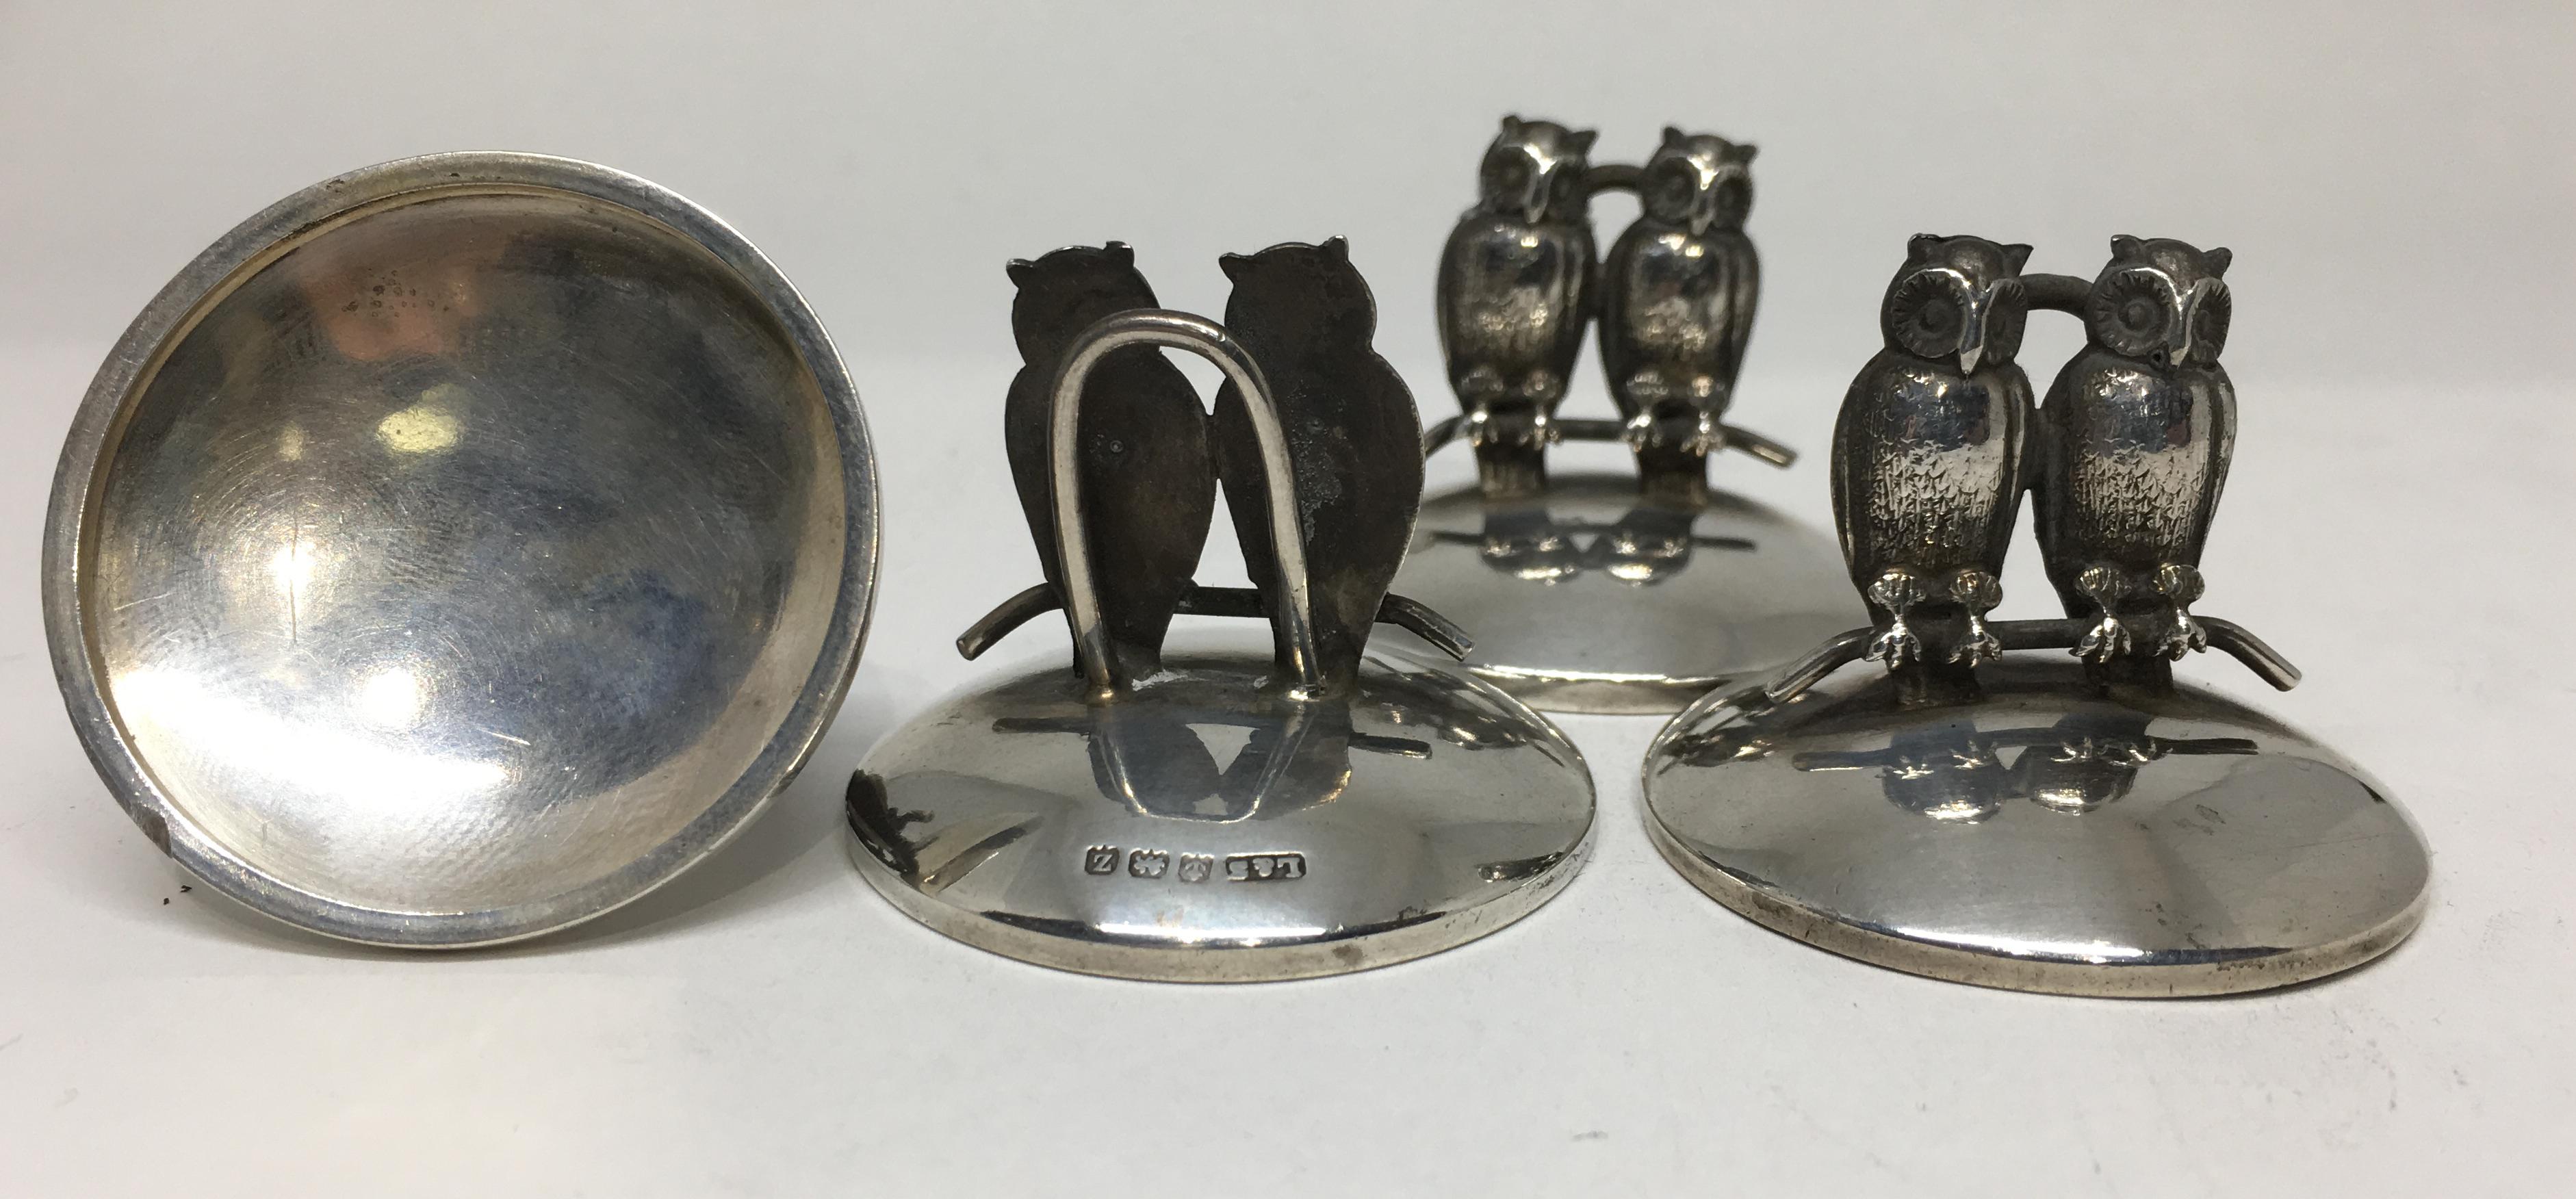 Art Deco Set of 4 Place Card / Menu Holders with Twin Owls on Branches In Excellent Condition For Sale In London, GB